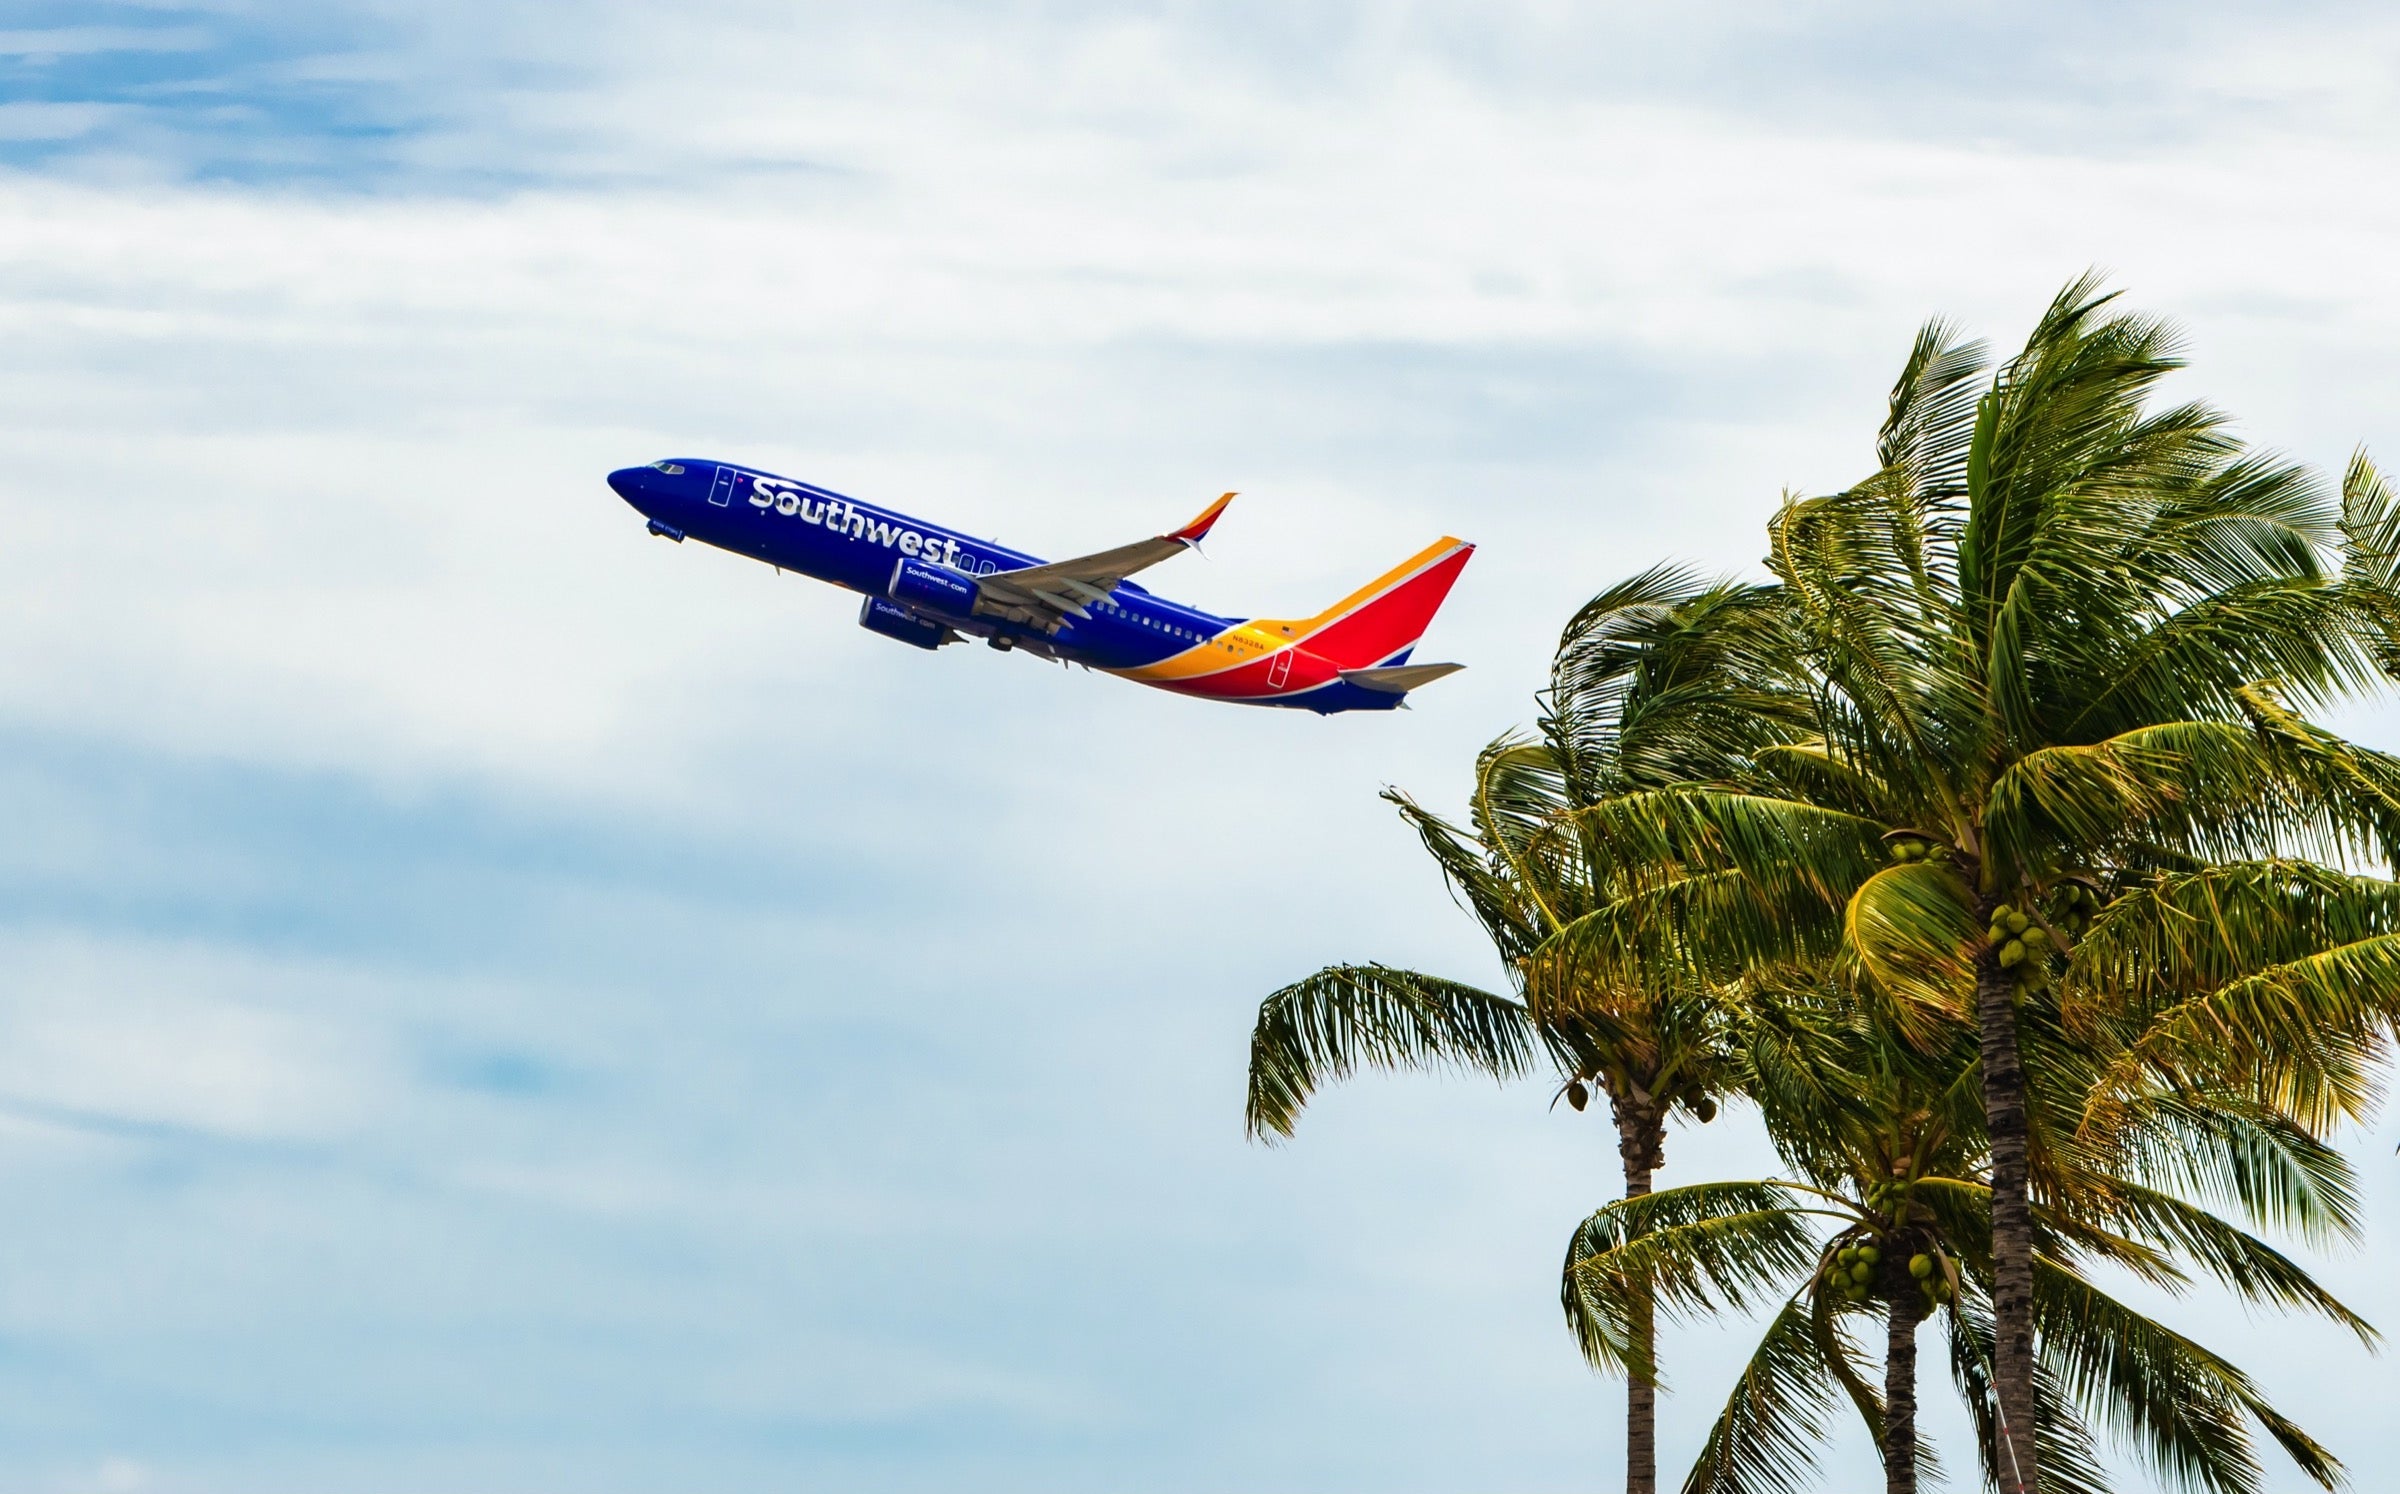 Southwest plane flying over a palm tree in Hawaii